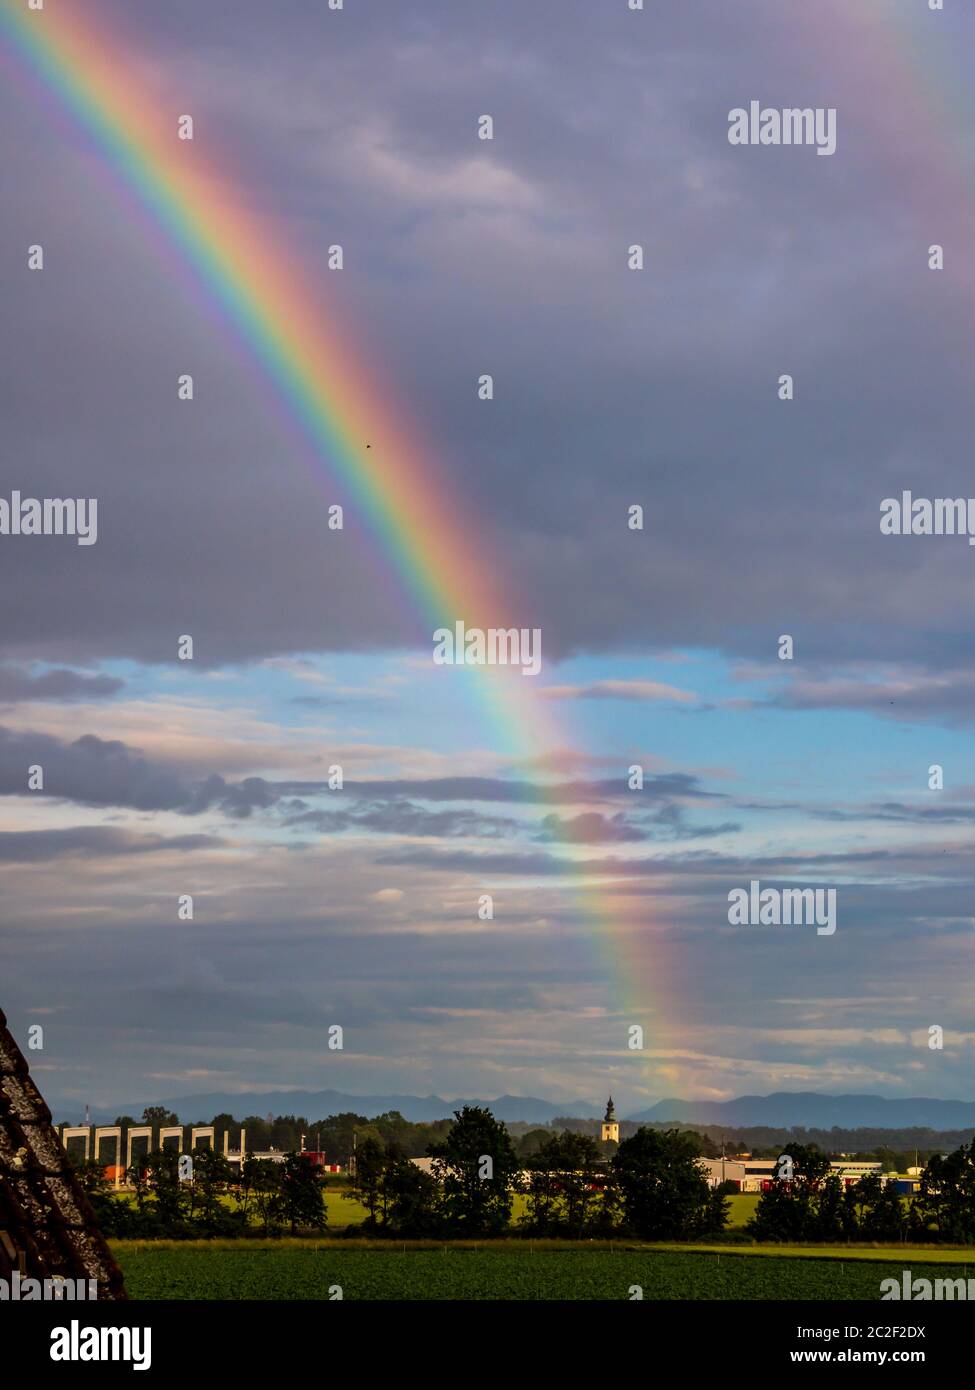 a rainbow is emerging after a thunderstorm rain in the sky Stock Photo